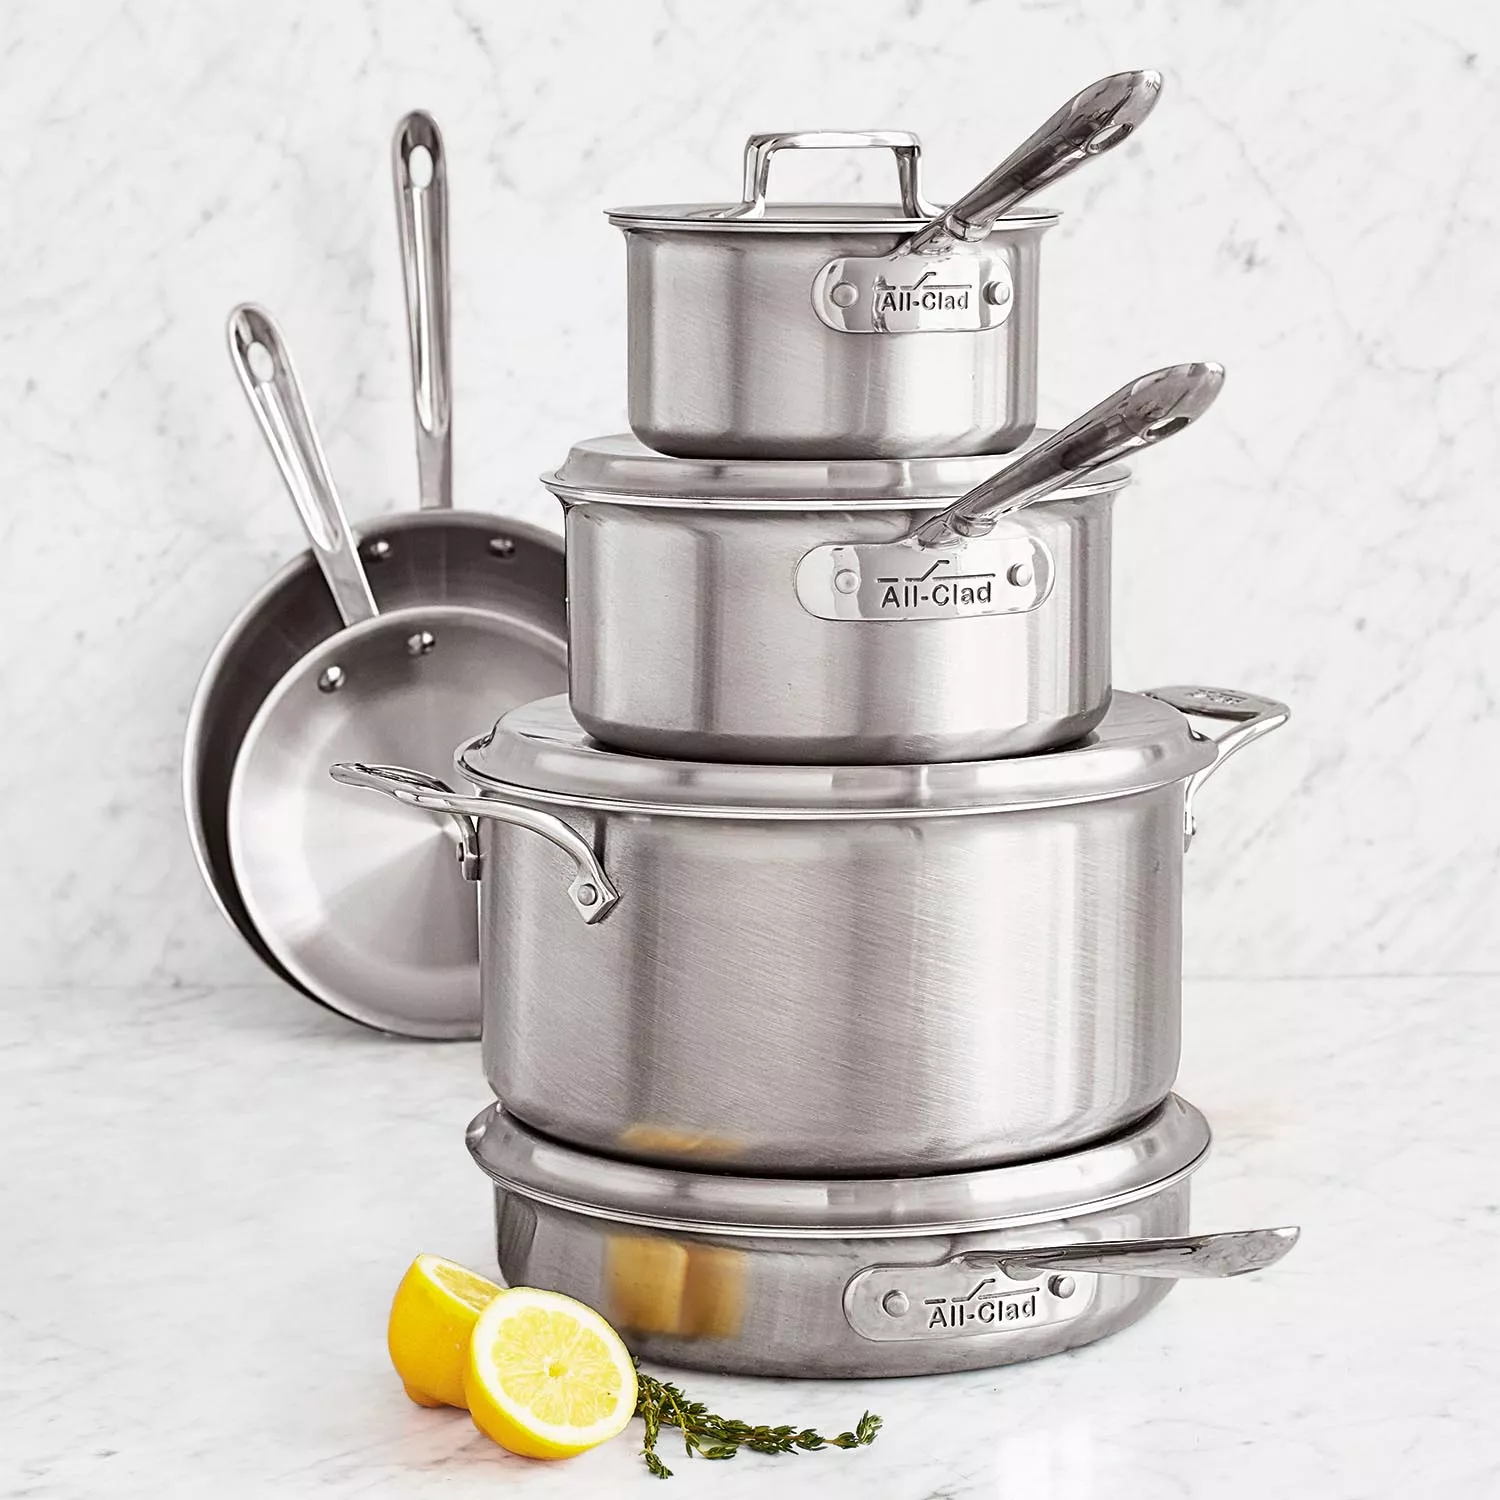 All-Clad D5 Brushed Stainless Steel 10 Piece Cookware Set with Free 4 Piece Lasagna Set